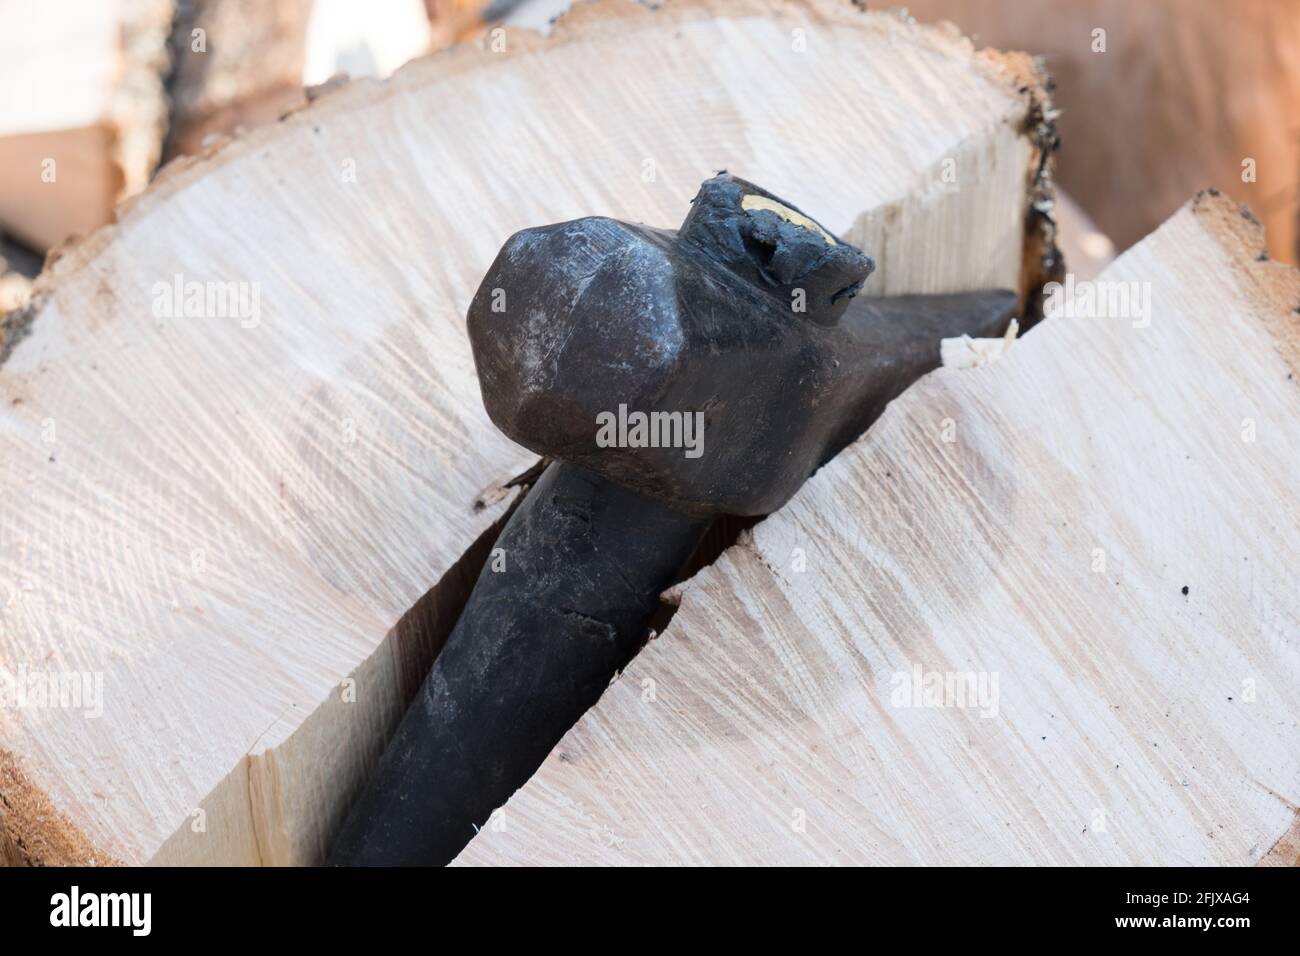 Eastern white ash tree being cut up and split for fire wood in Vermont, New England, USA. Stock Photo